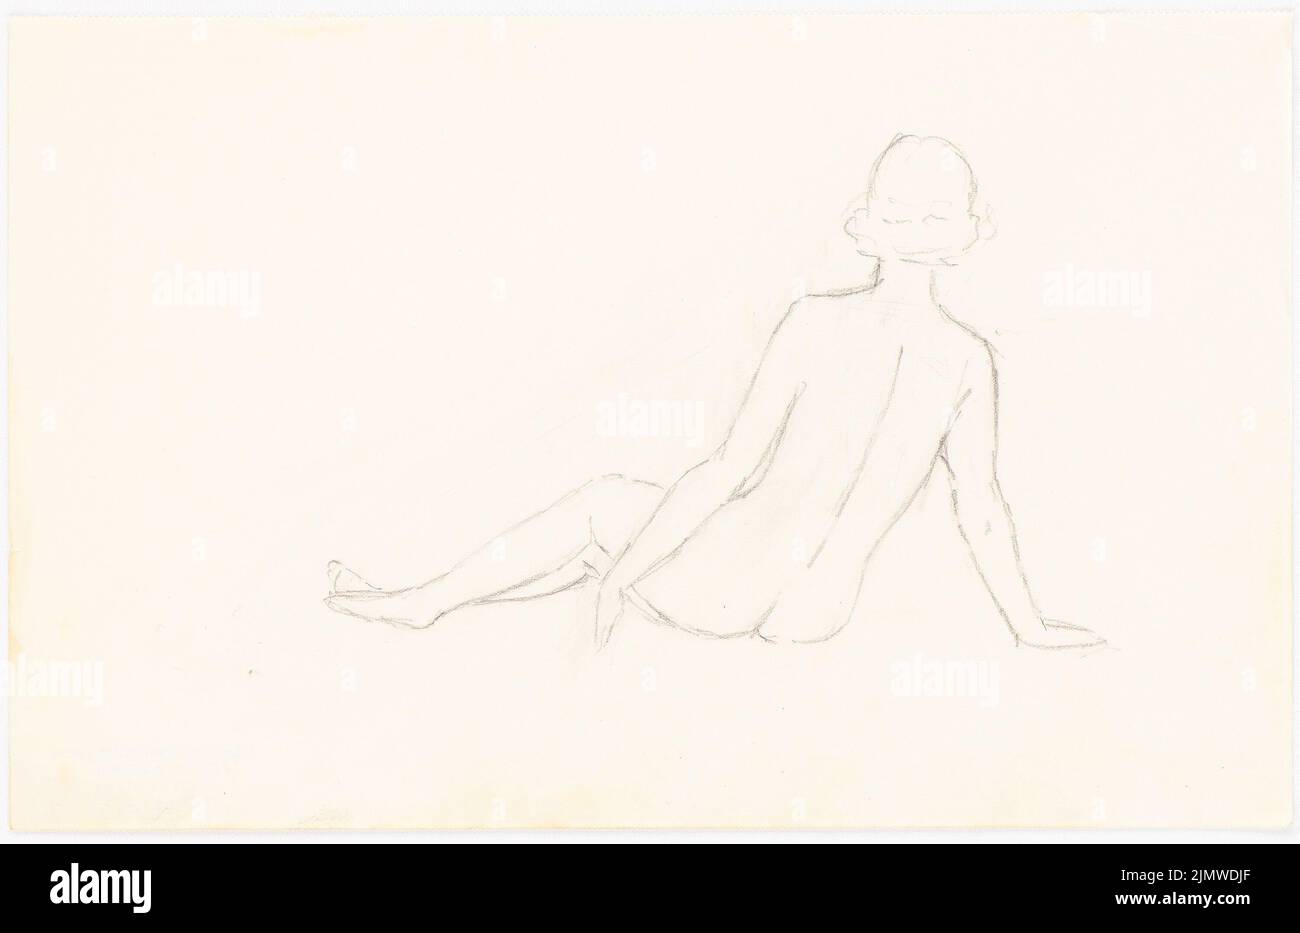 Michel Paul jun. (1922-1943), female act. Back act half-lying (approx. 1940): Sketch back view young woman, half lying with the right hand. Pencil on paper, 20.8 x 32 cm (including scan edges) Michel Paul jun.  (1922-1943): Weiblicher Akt. Rückenakt halb liegend Stock Photo